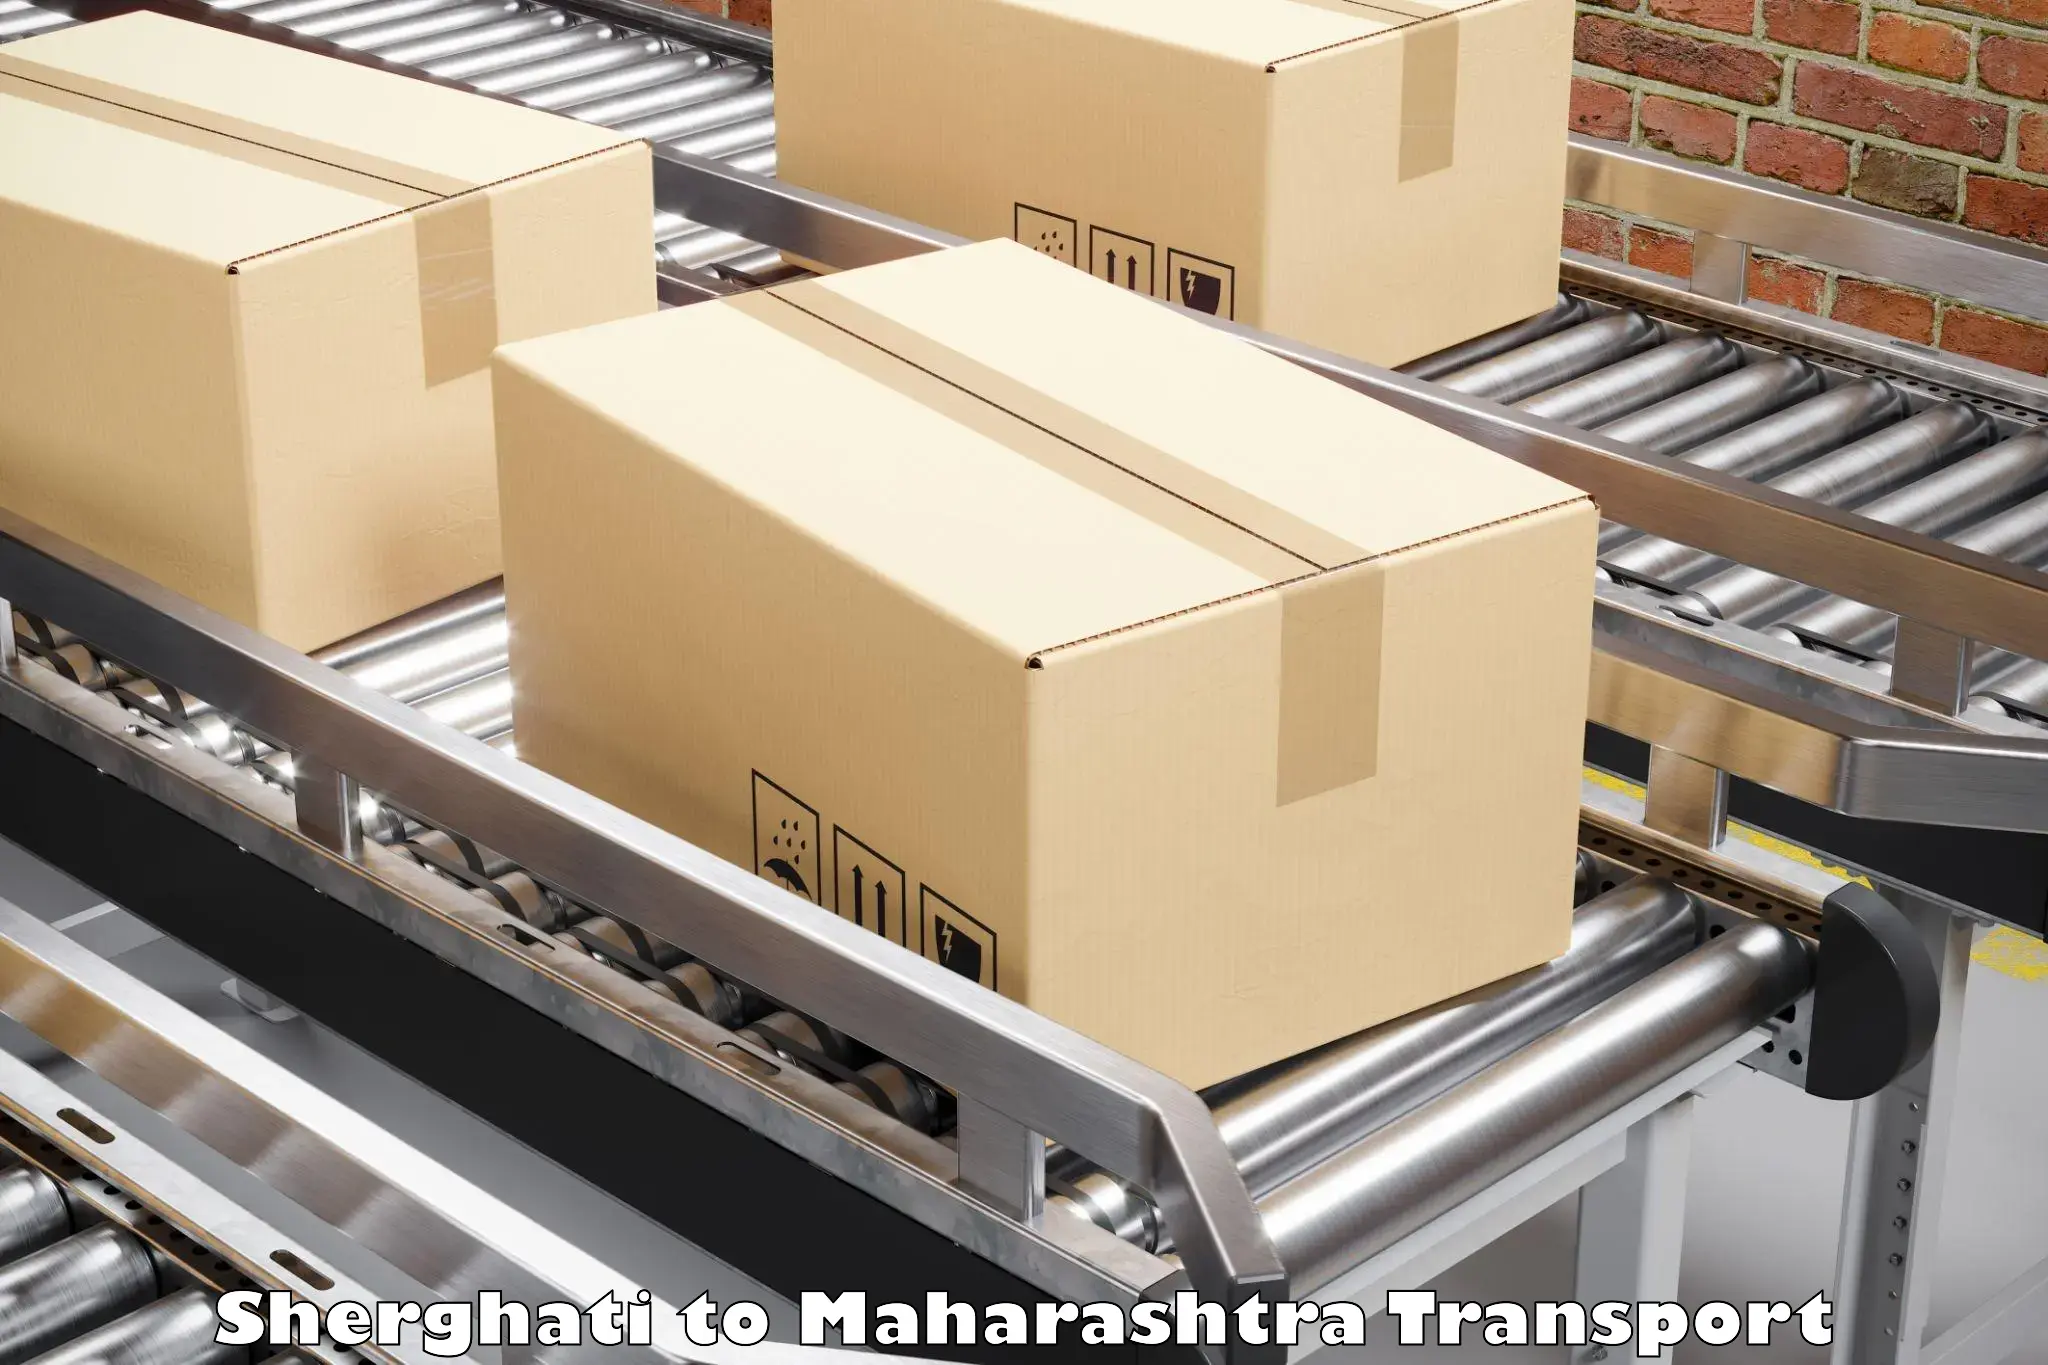 Air freight transport services Sherghati to Thane